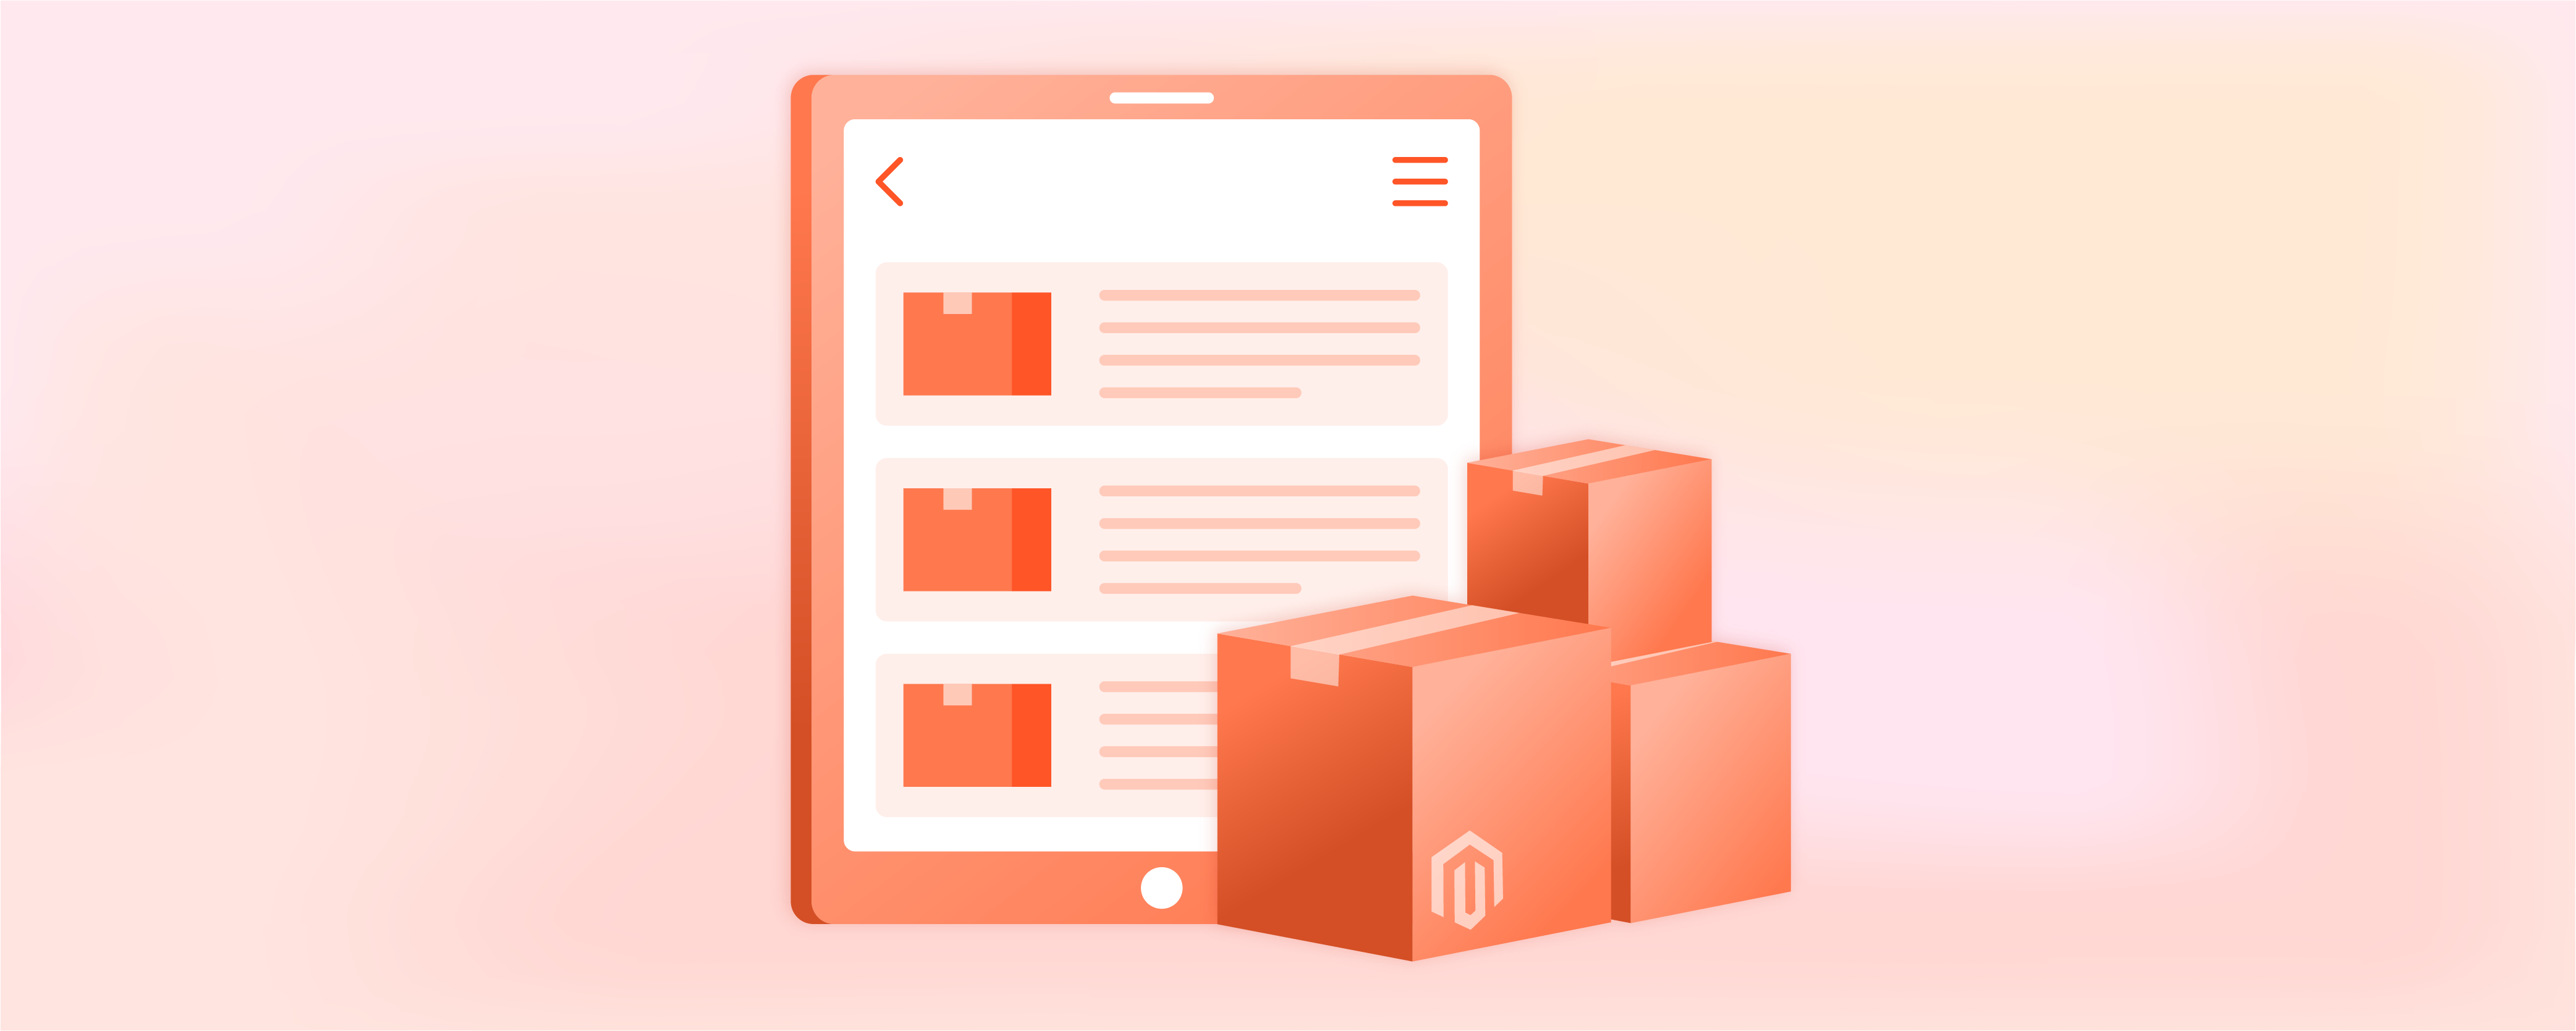 Choose the Right Magento OMS: Order Management System